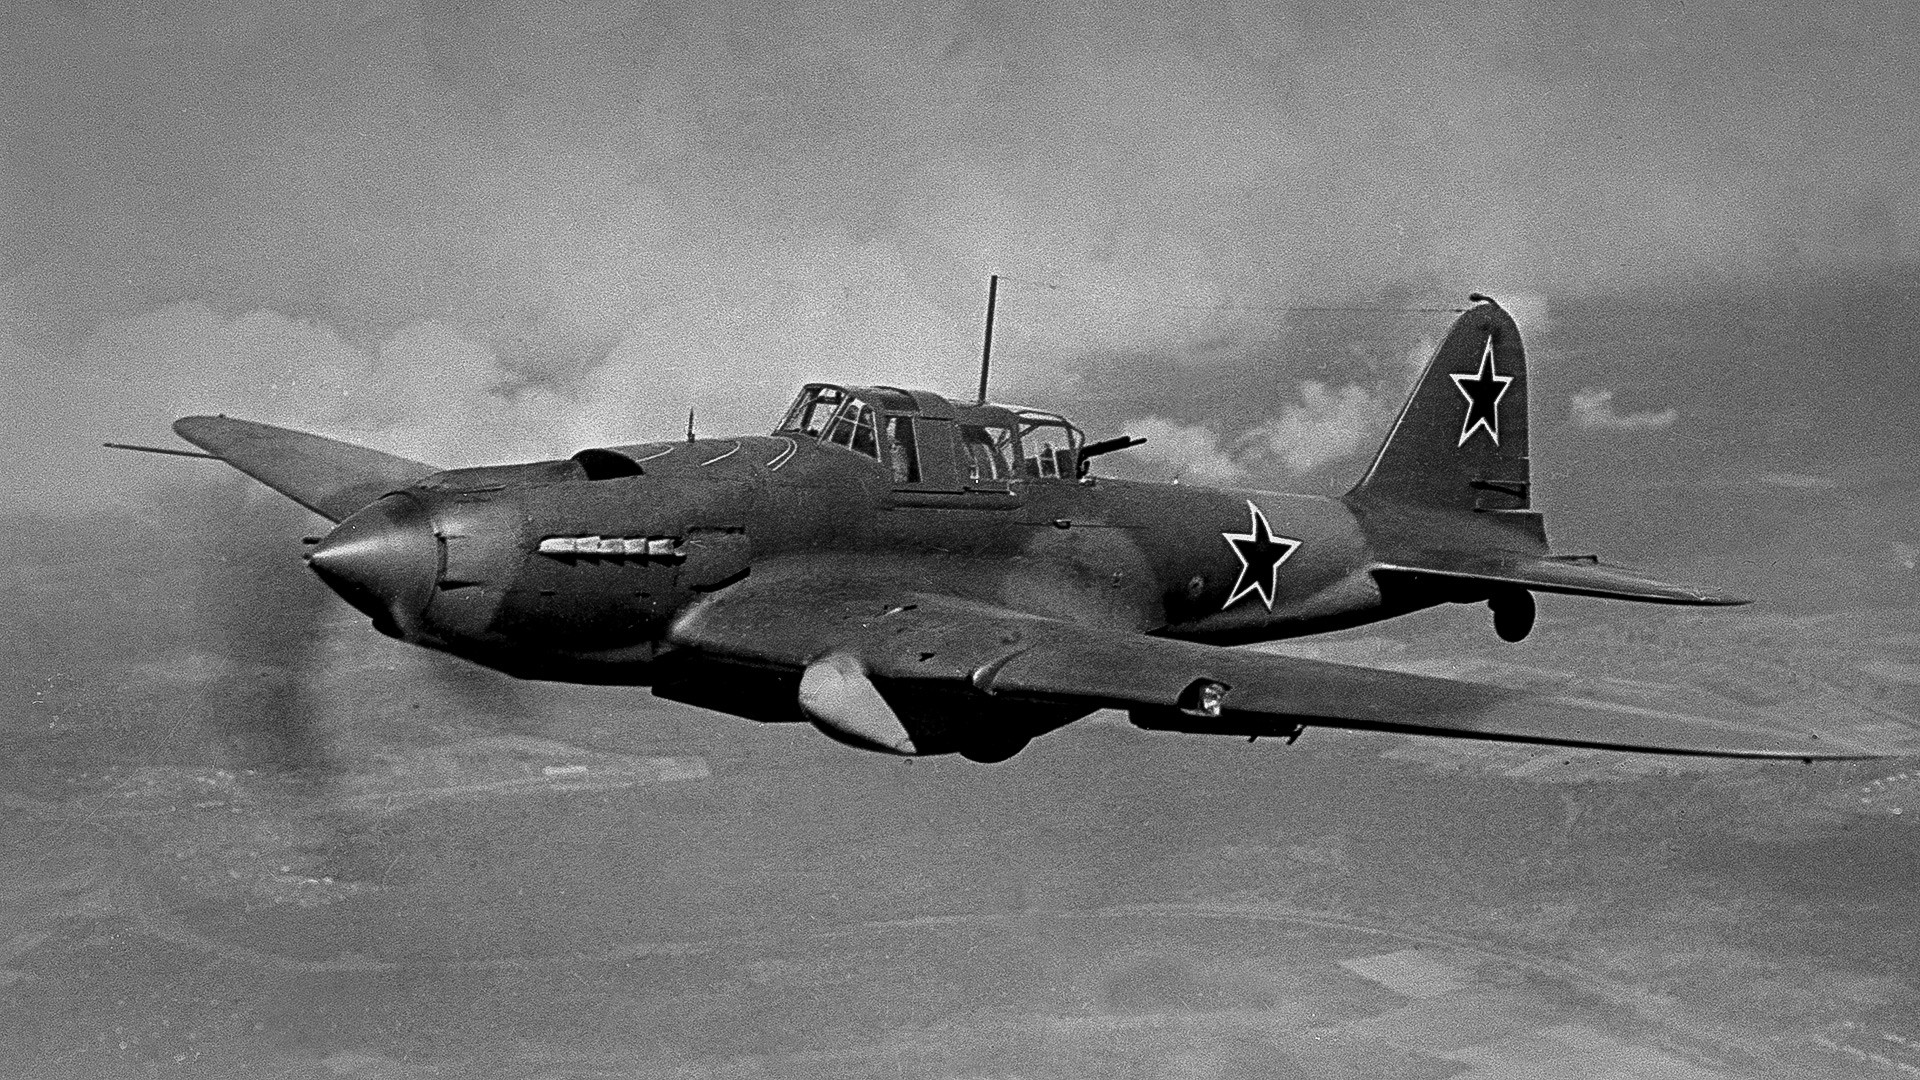 The key feature of the Il-2 was its armored-plating